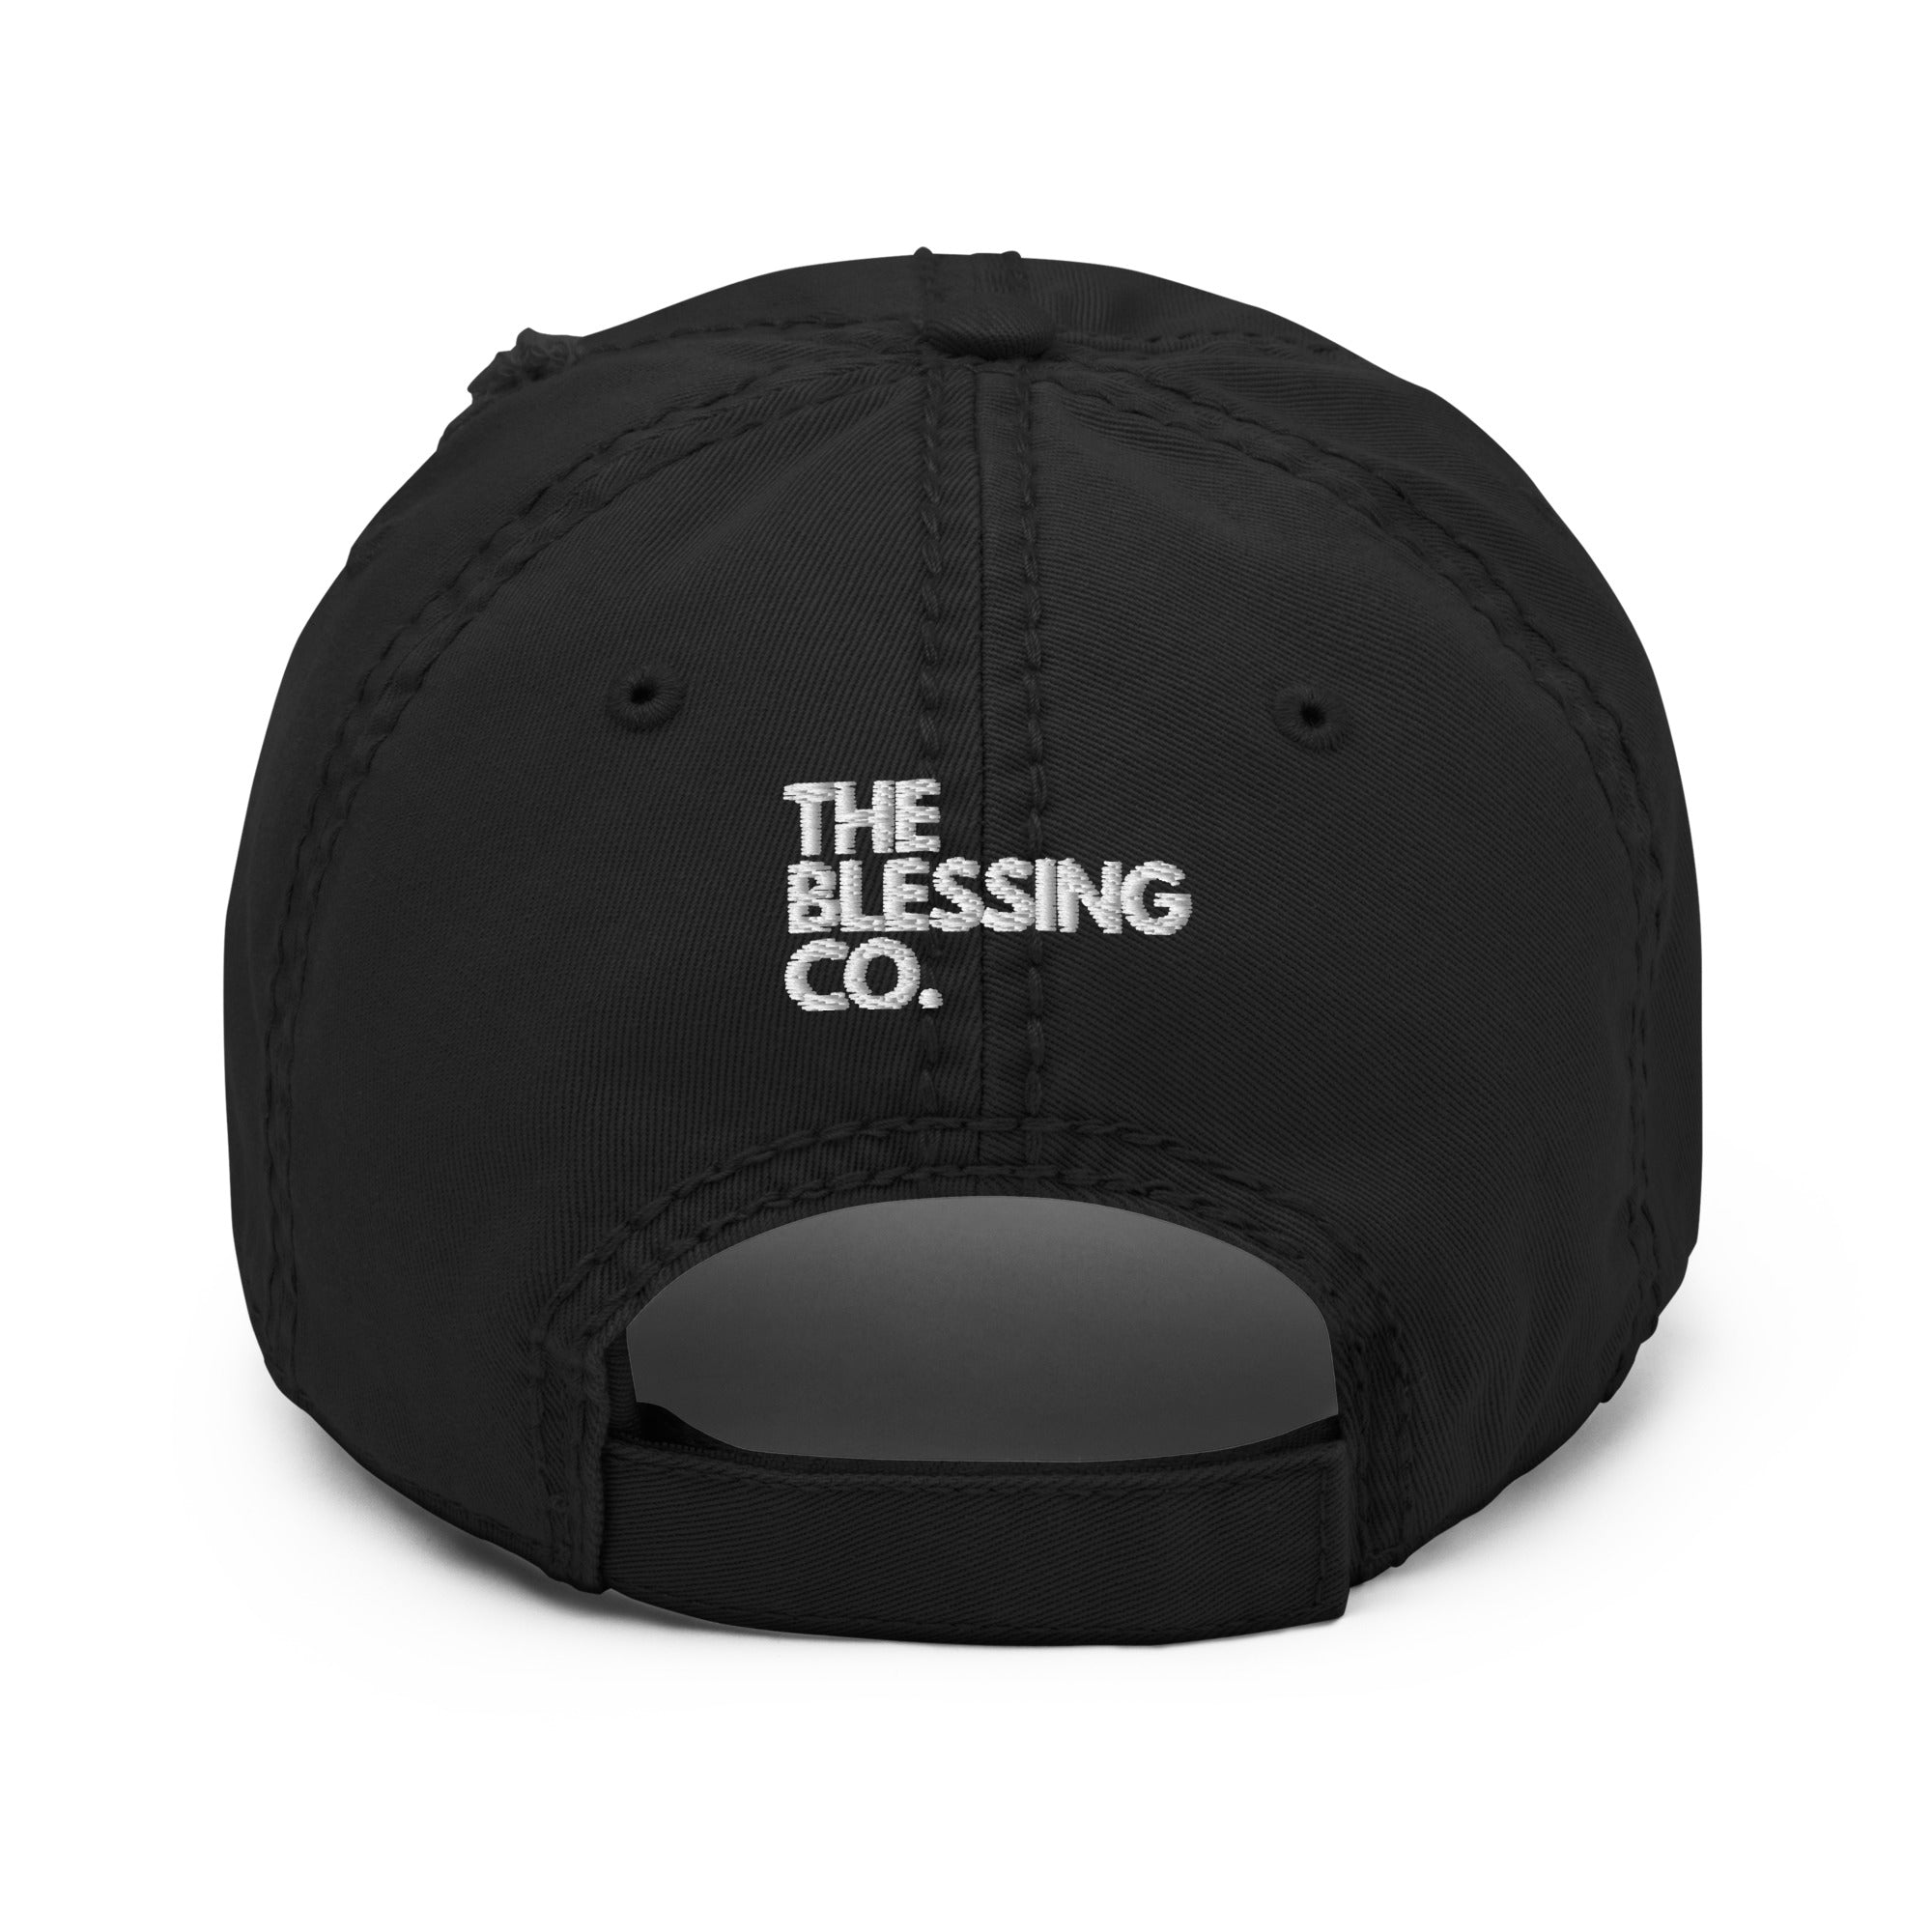 The Blessing Co. Distressed Hat